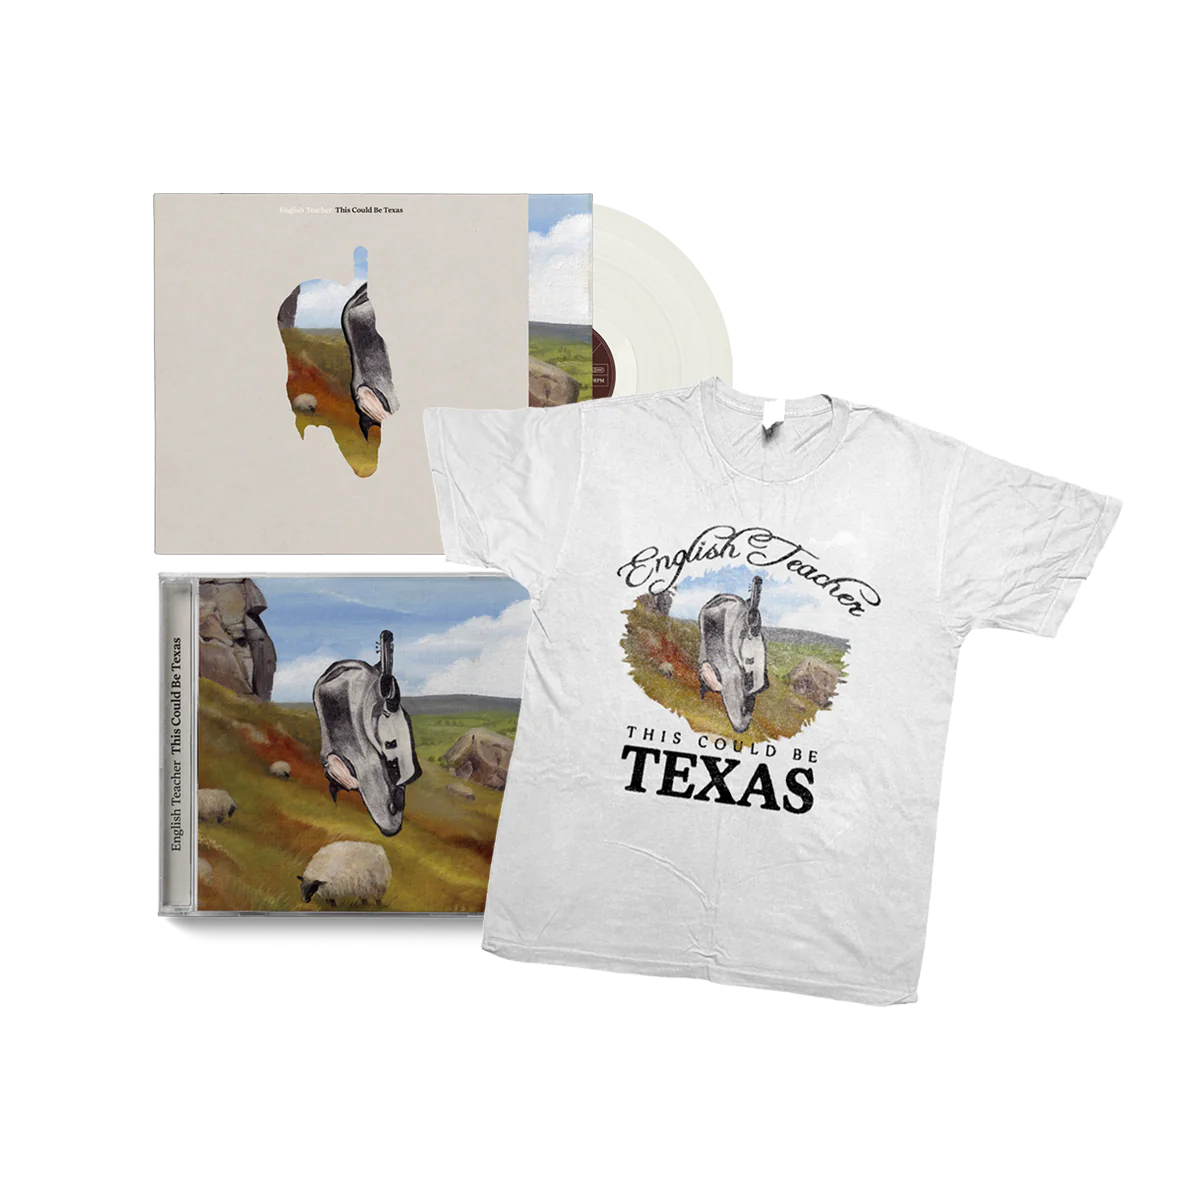 This Could Be Texas: Limited Milky White Vinyl LP, CD, T-Shirt + Signed Art Card